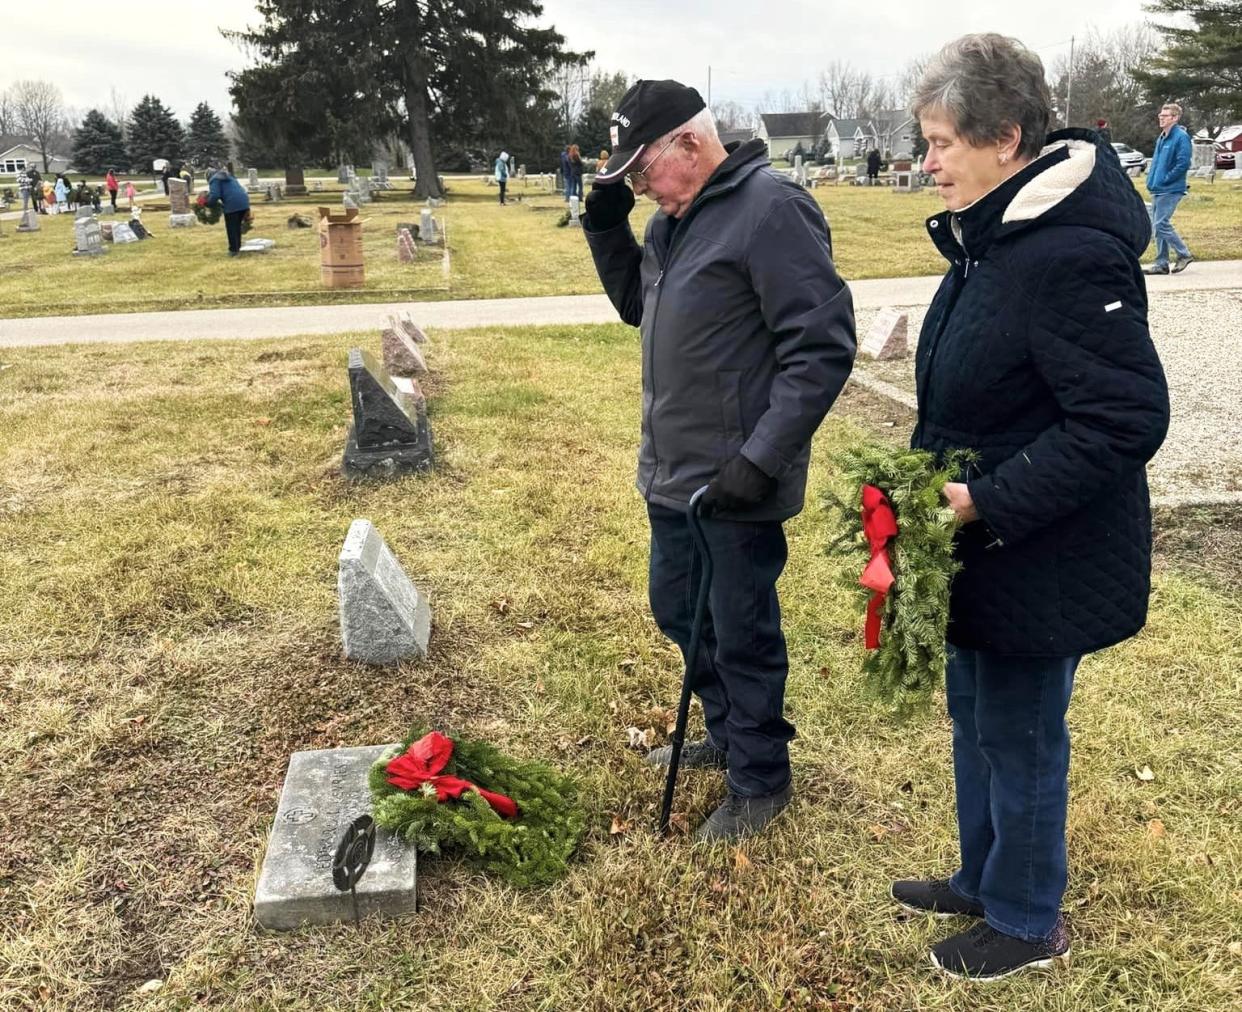 Members of the Elizabeth Schuyler Hamilton Chapter of the Daughters of the American Revolution recently laid wreaths on the gravesites of 58 veterans at West Drenthe Cemetery in Zeeland.